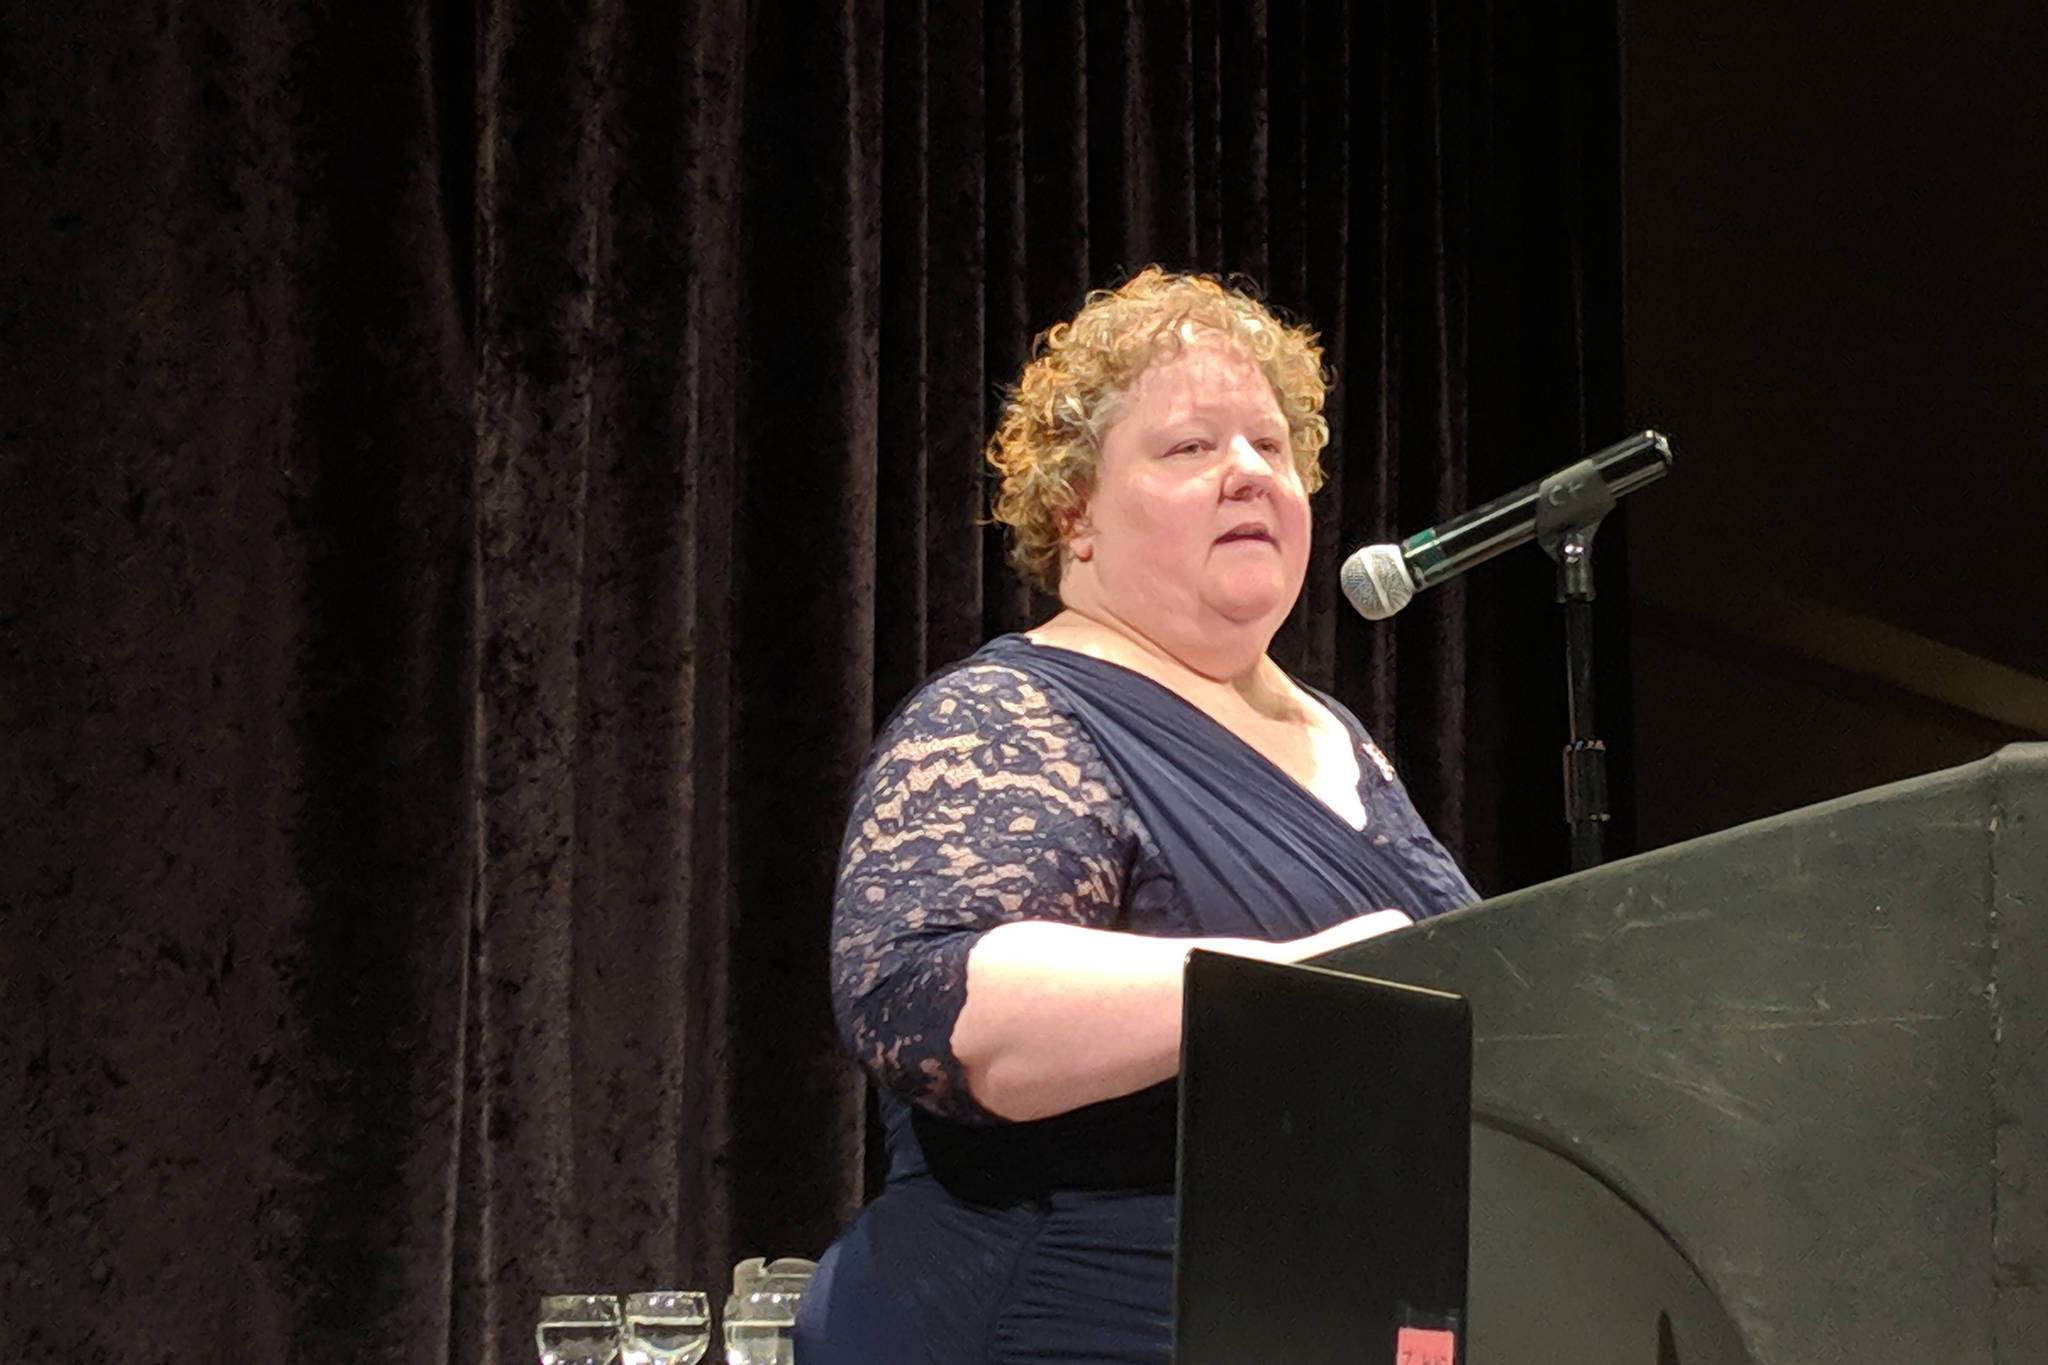 Kathryn Beers speaks at the Woman of Distinction 2019 Celebration Saturday, March 9, 2019, at Centennial Hall. Beers shared her firsthand account of the difference Aiding Women in Abuse and Rape Emergencies (AWARE) had in her life. (Ben Hohenstatt | Capital City Weekly)